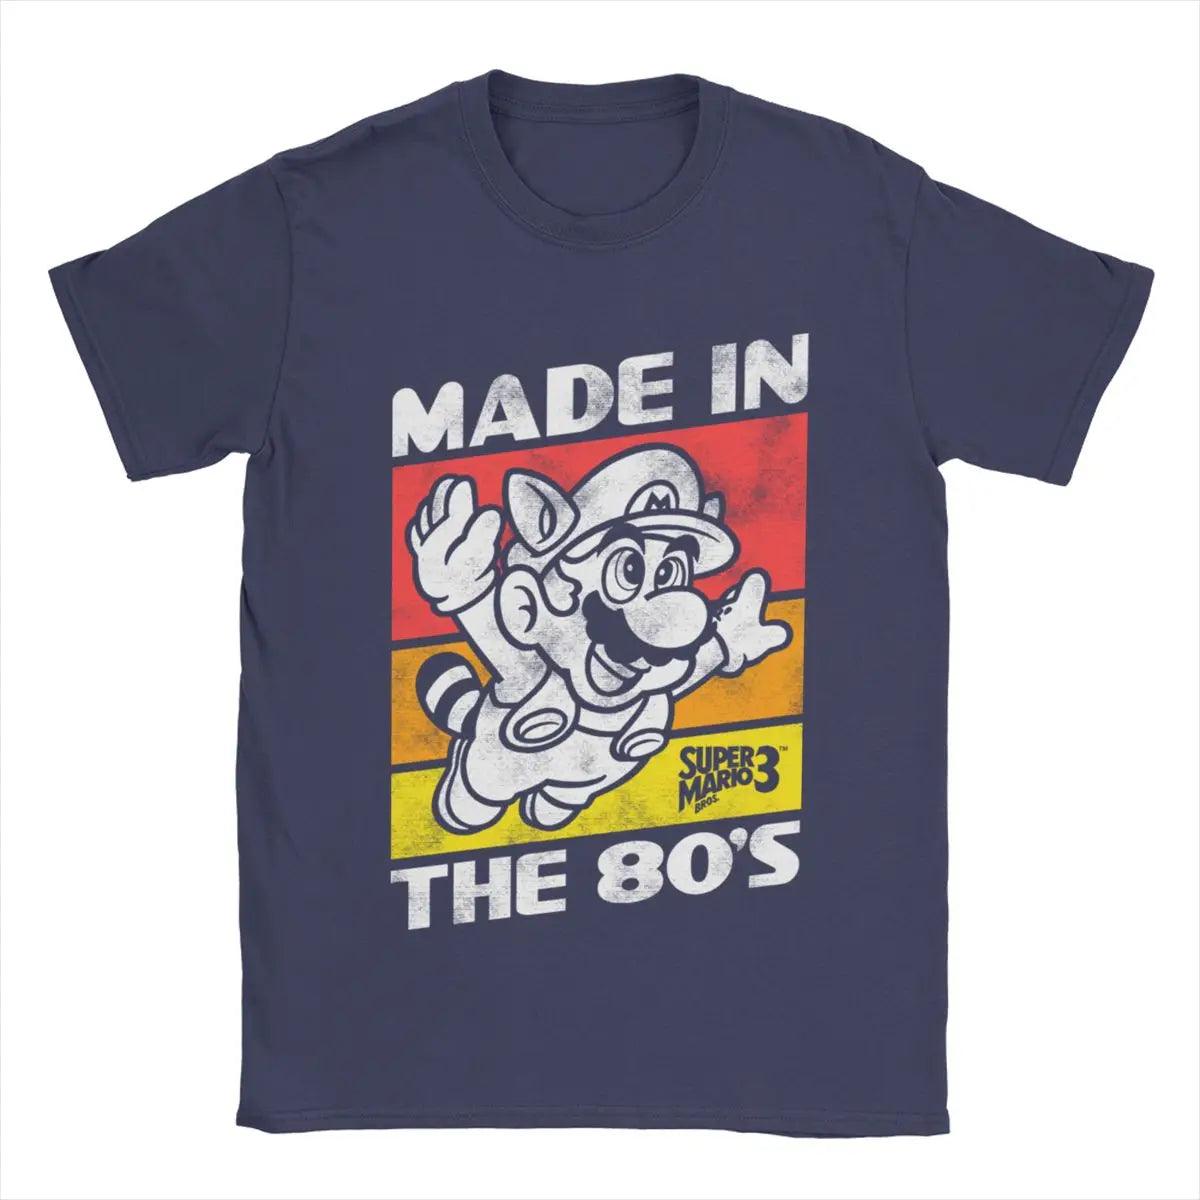 Super Mario Made in the 80s T-Shirts (6 Colors) - AnimeGo Store